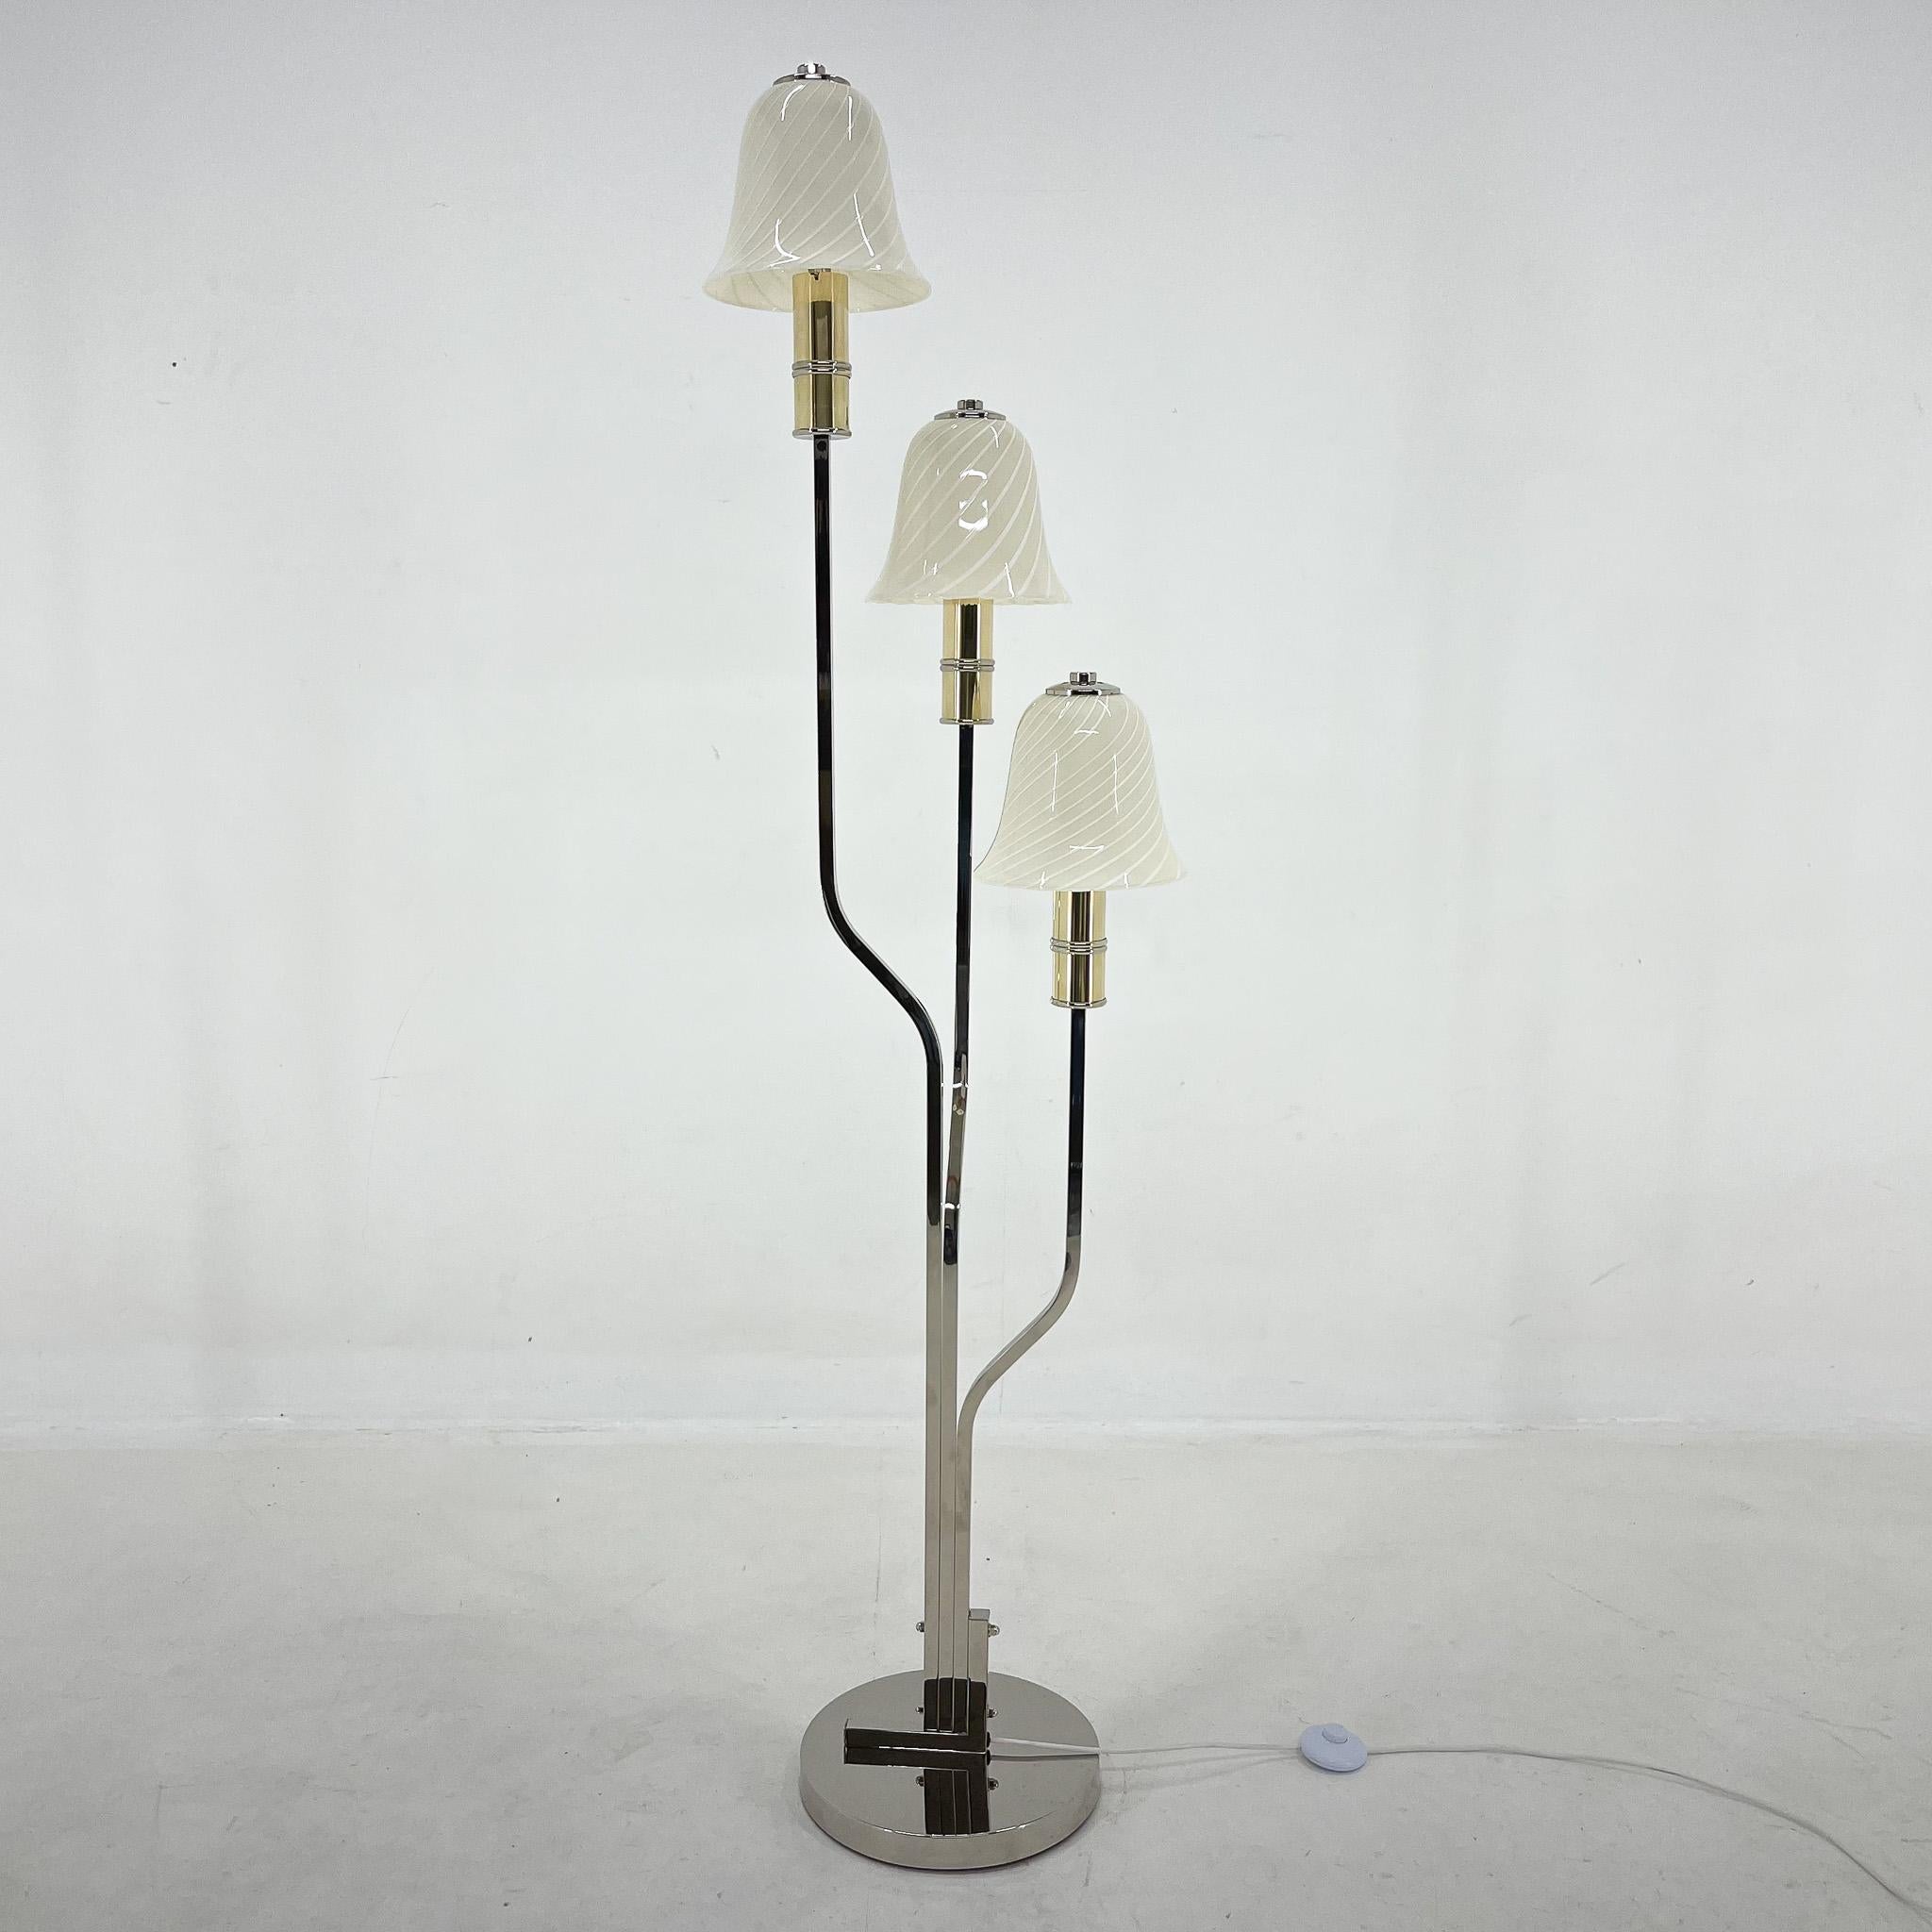 A rare chrome floor lamp from Italy, made in the 1970s. The shades are original, hand made Murano glass and the lamp was obviously intended to resemble magic mushrooms. It casts a beautiful light and would be a wonderful addition to any interior. In